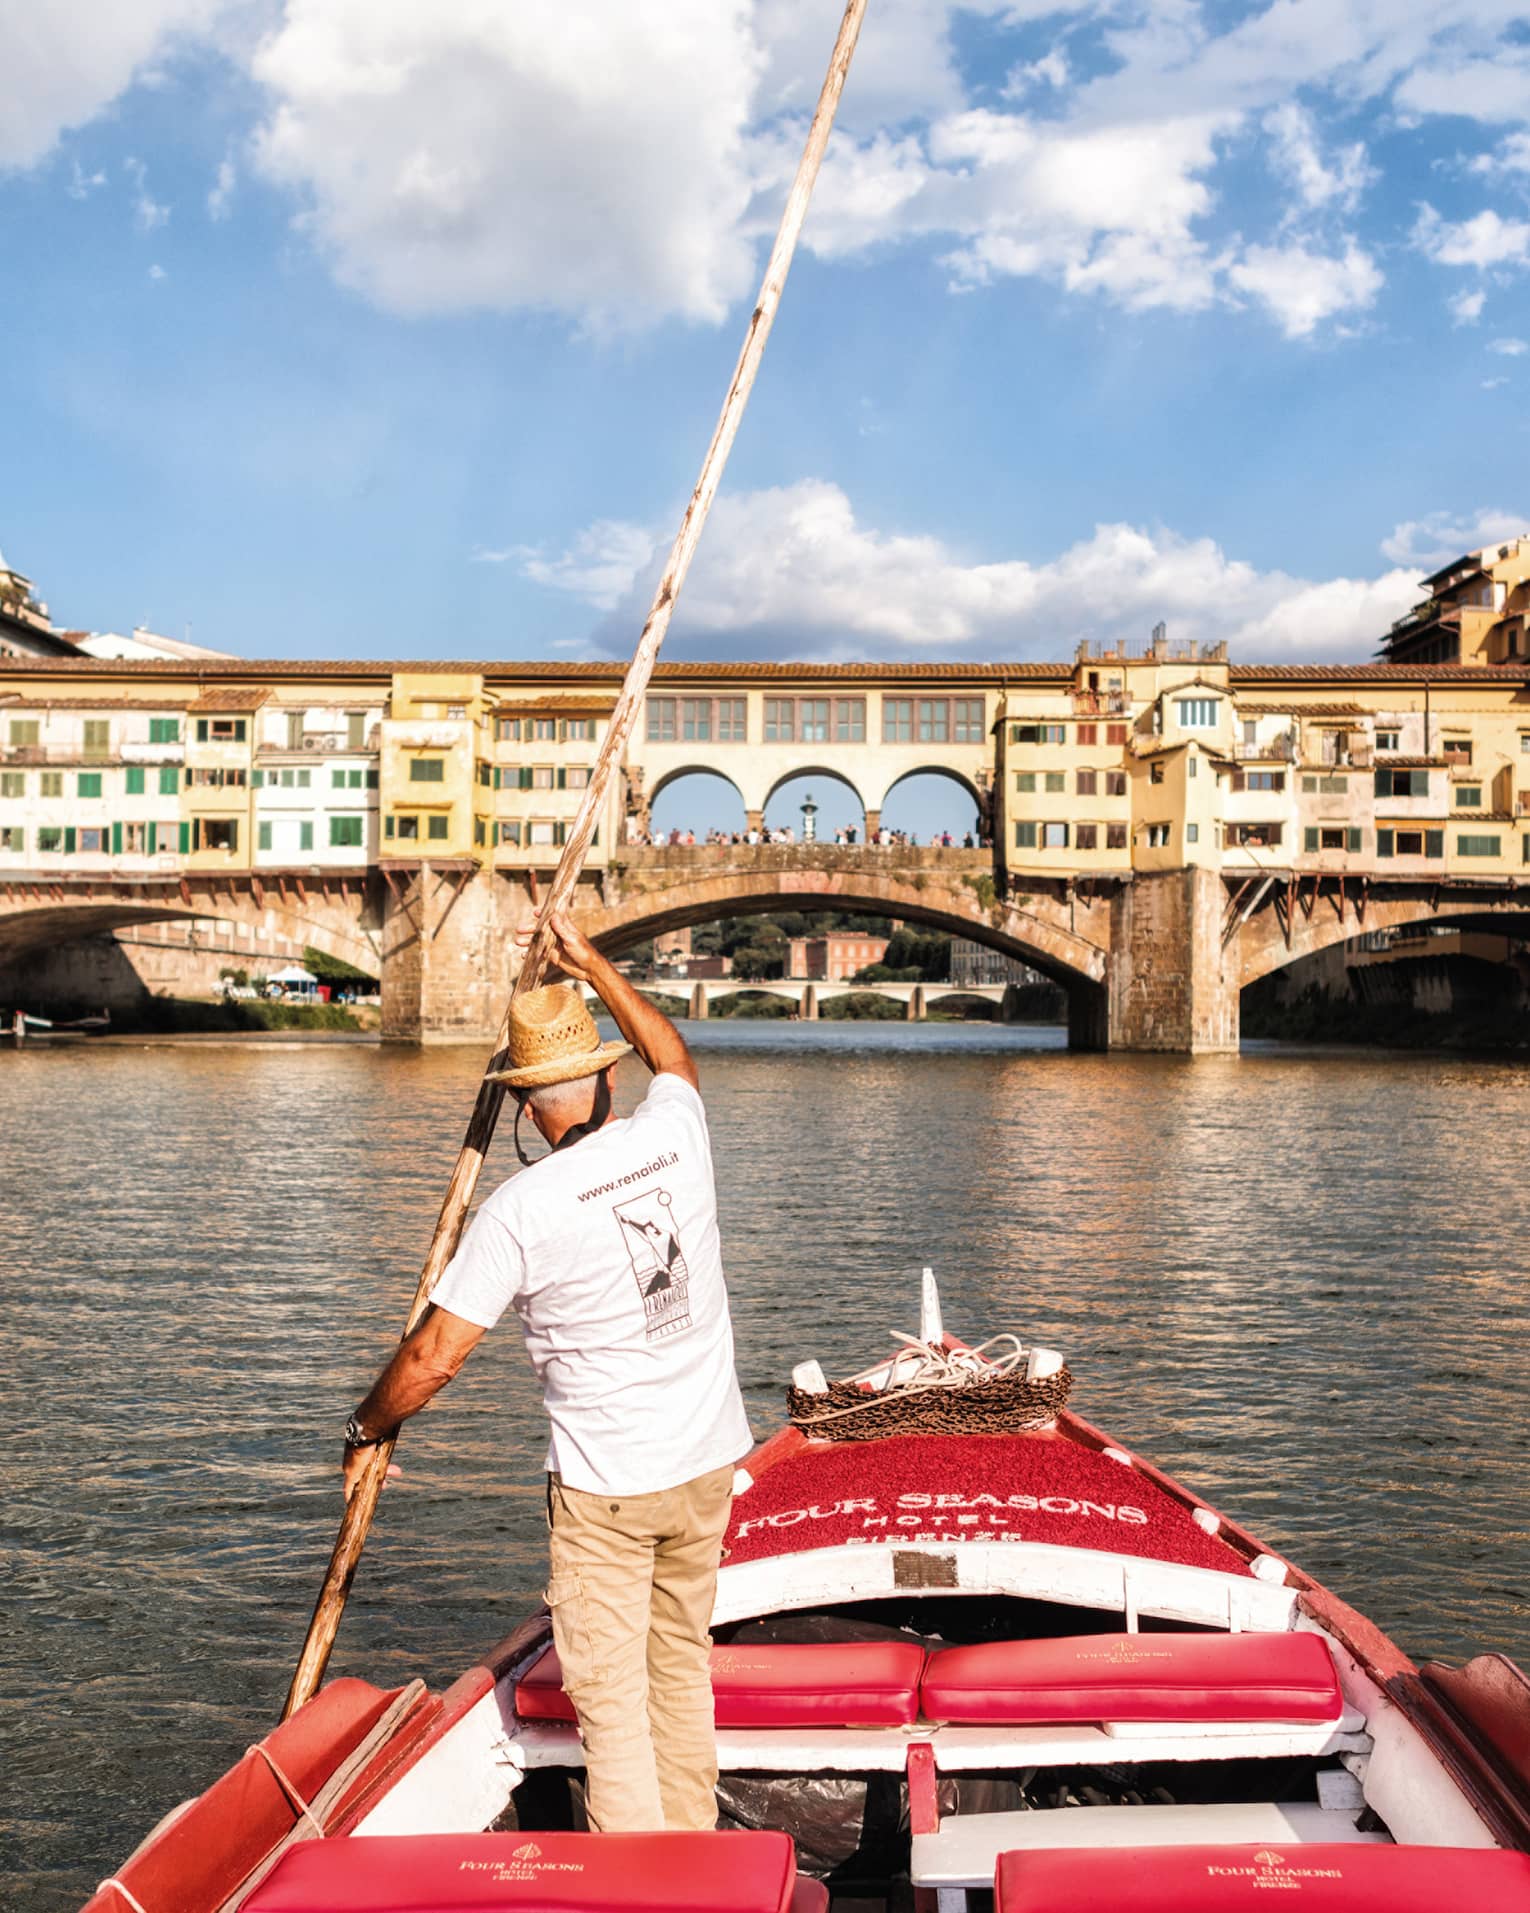 Man with long paddle steers Barchetto boat on Florence canal near bridge